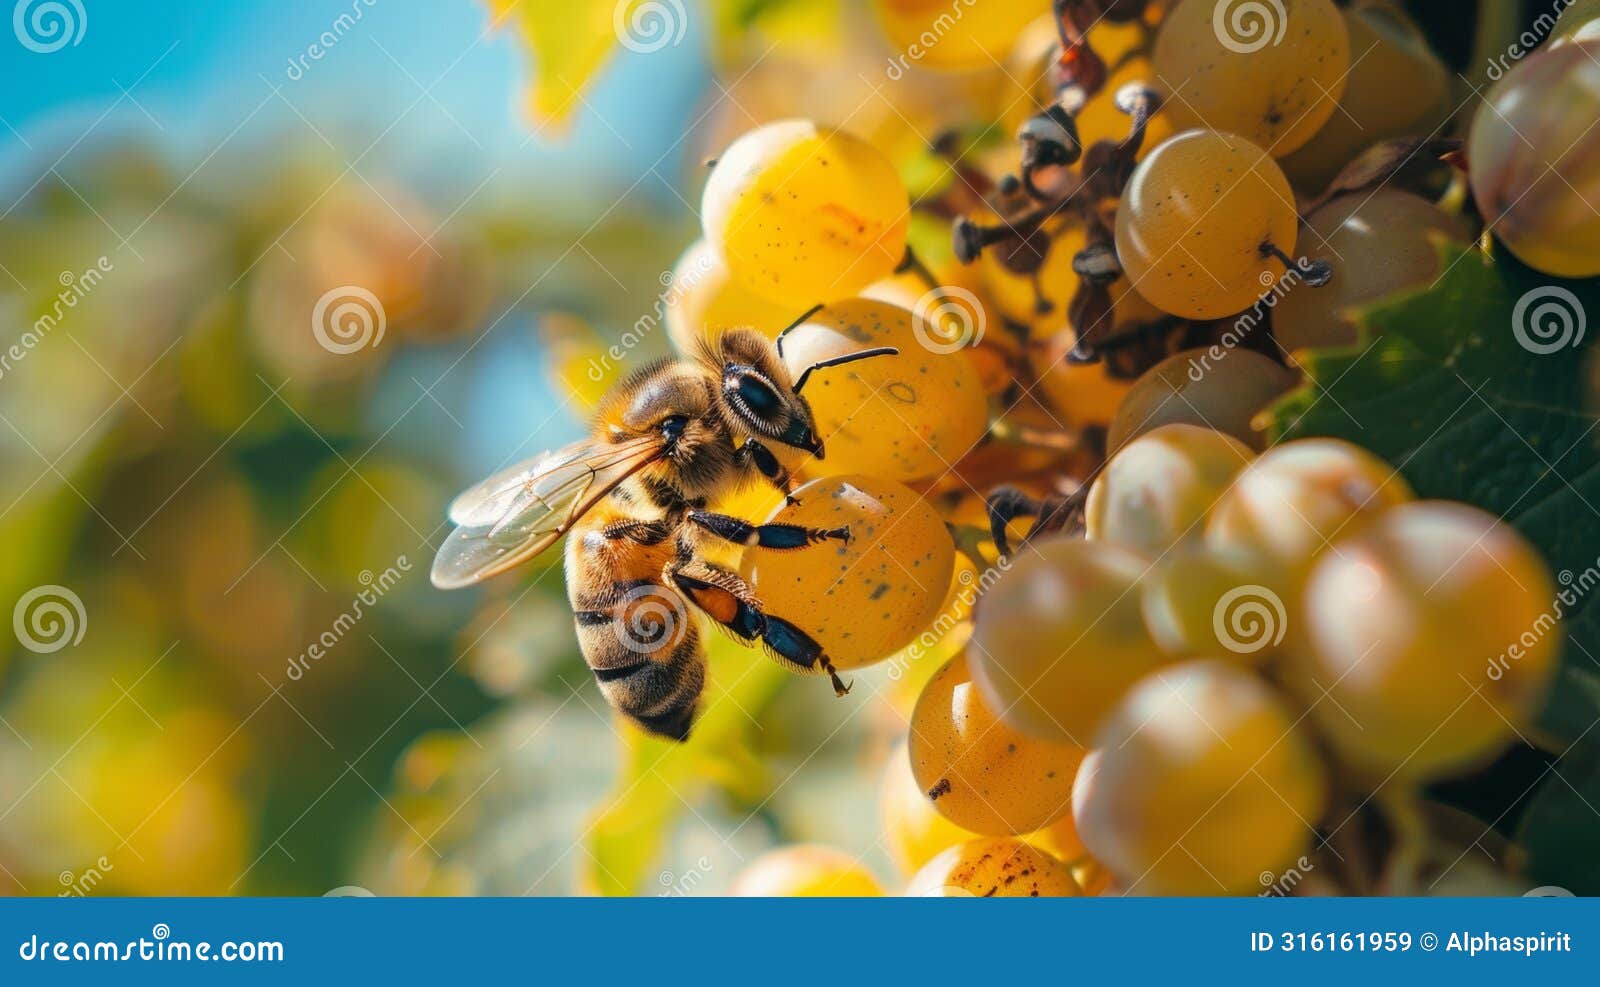 close-up of a bee on fruit berries, izing the impact of pesticides on nature